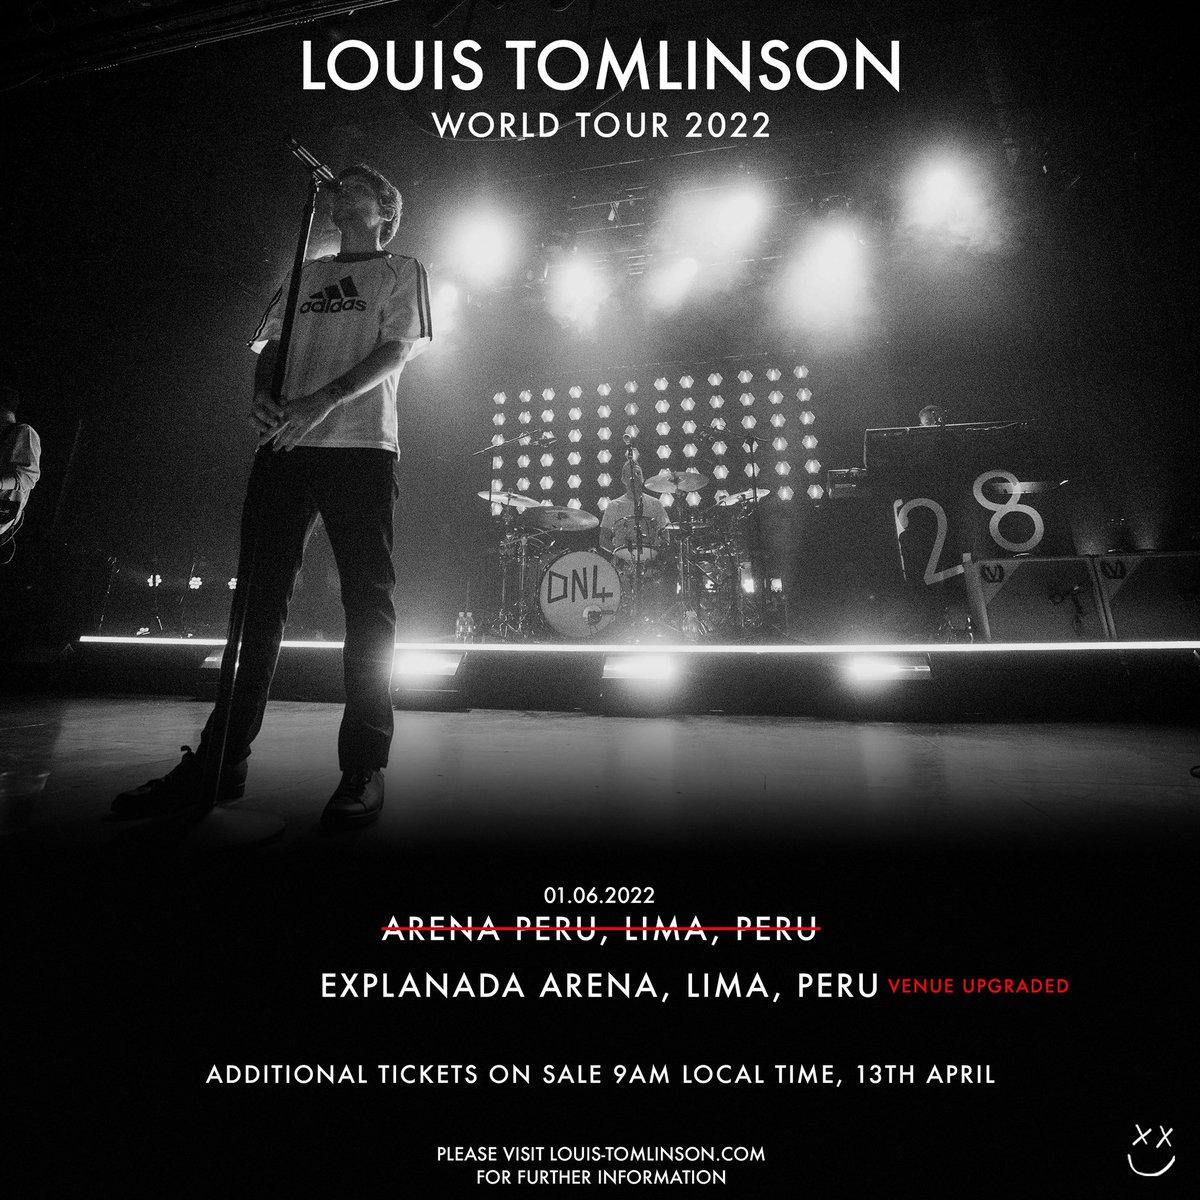 Due to demand, Louis' World Tour show in Lima has been upgraded to the Explanada Arena. For further info visit: louis-tomlinson.com